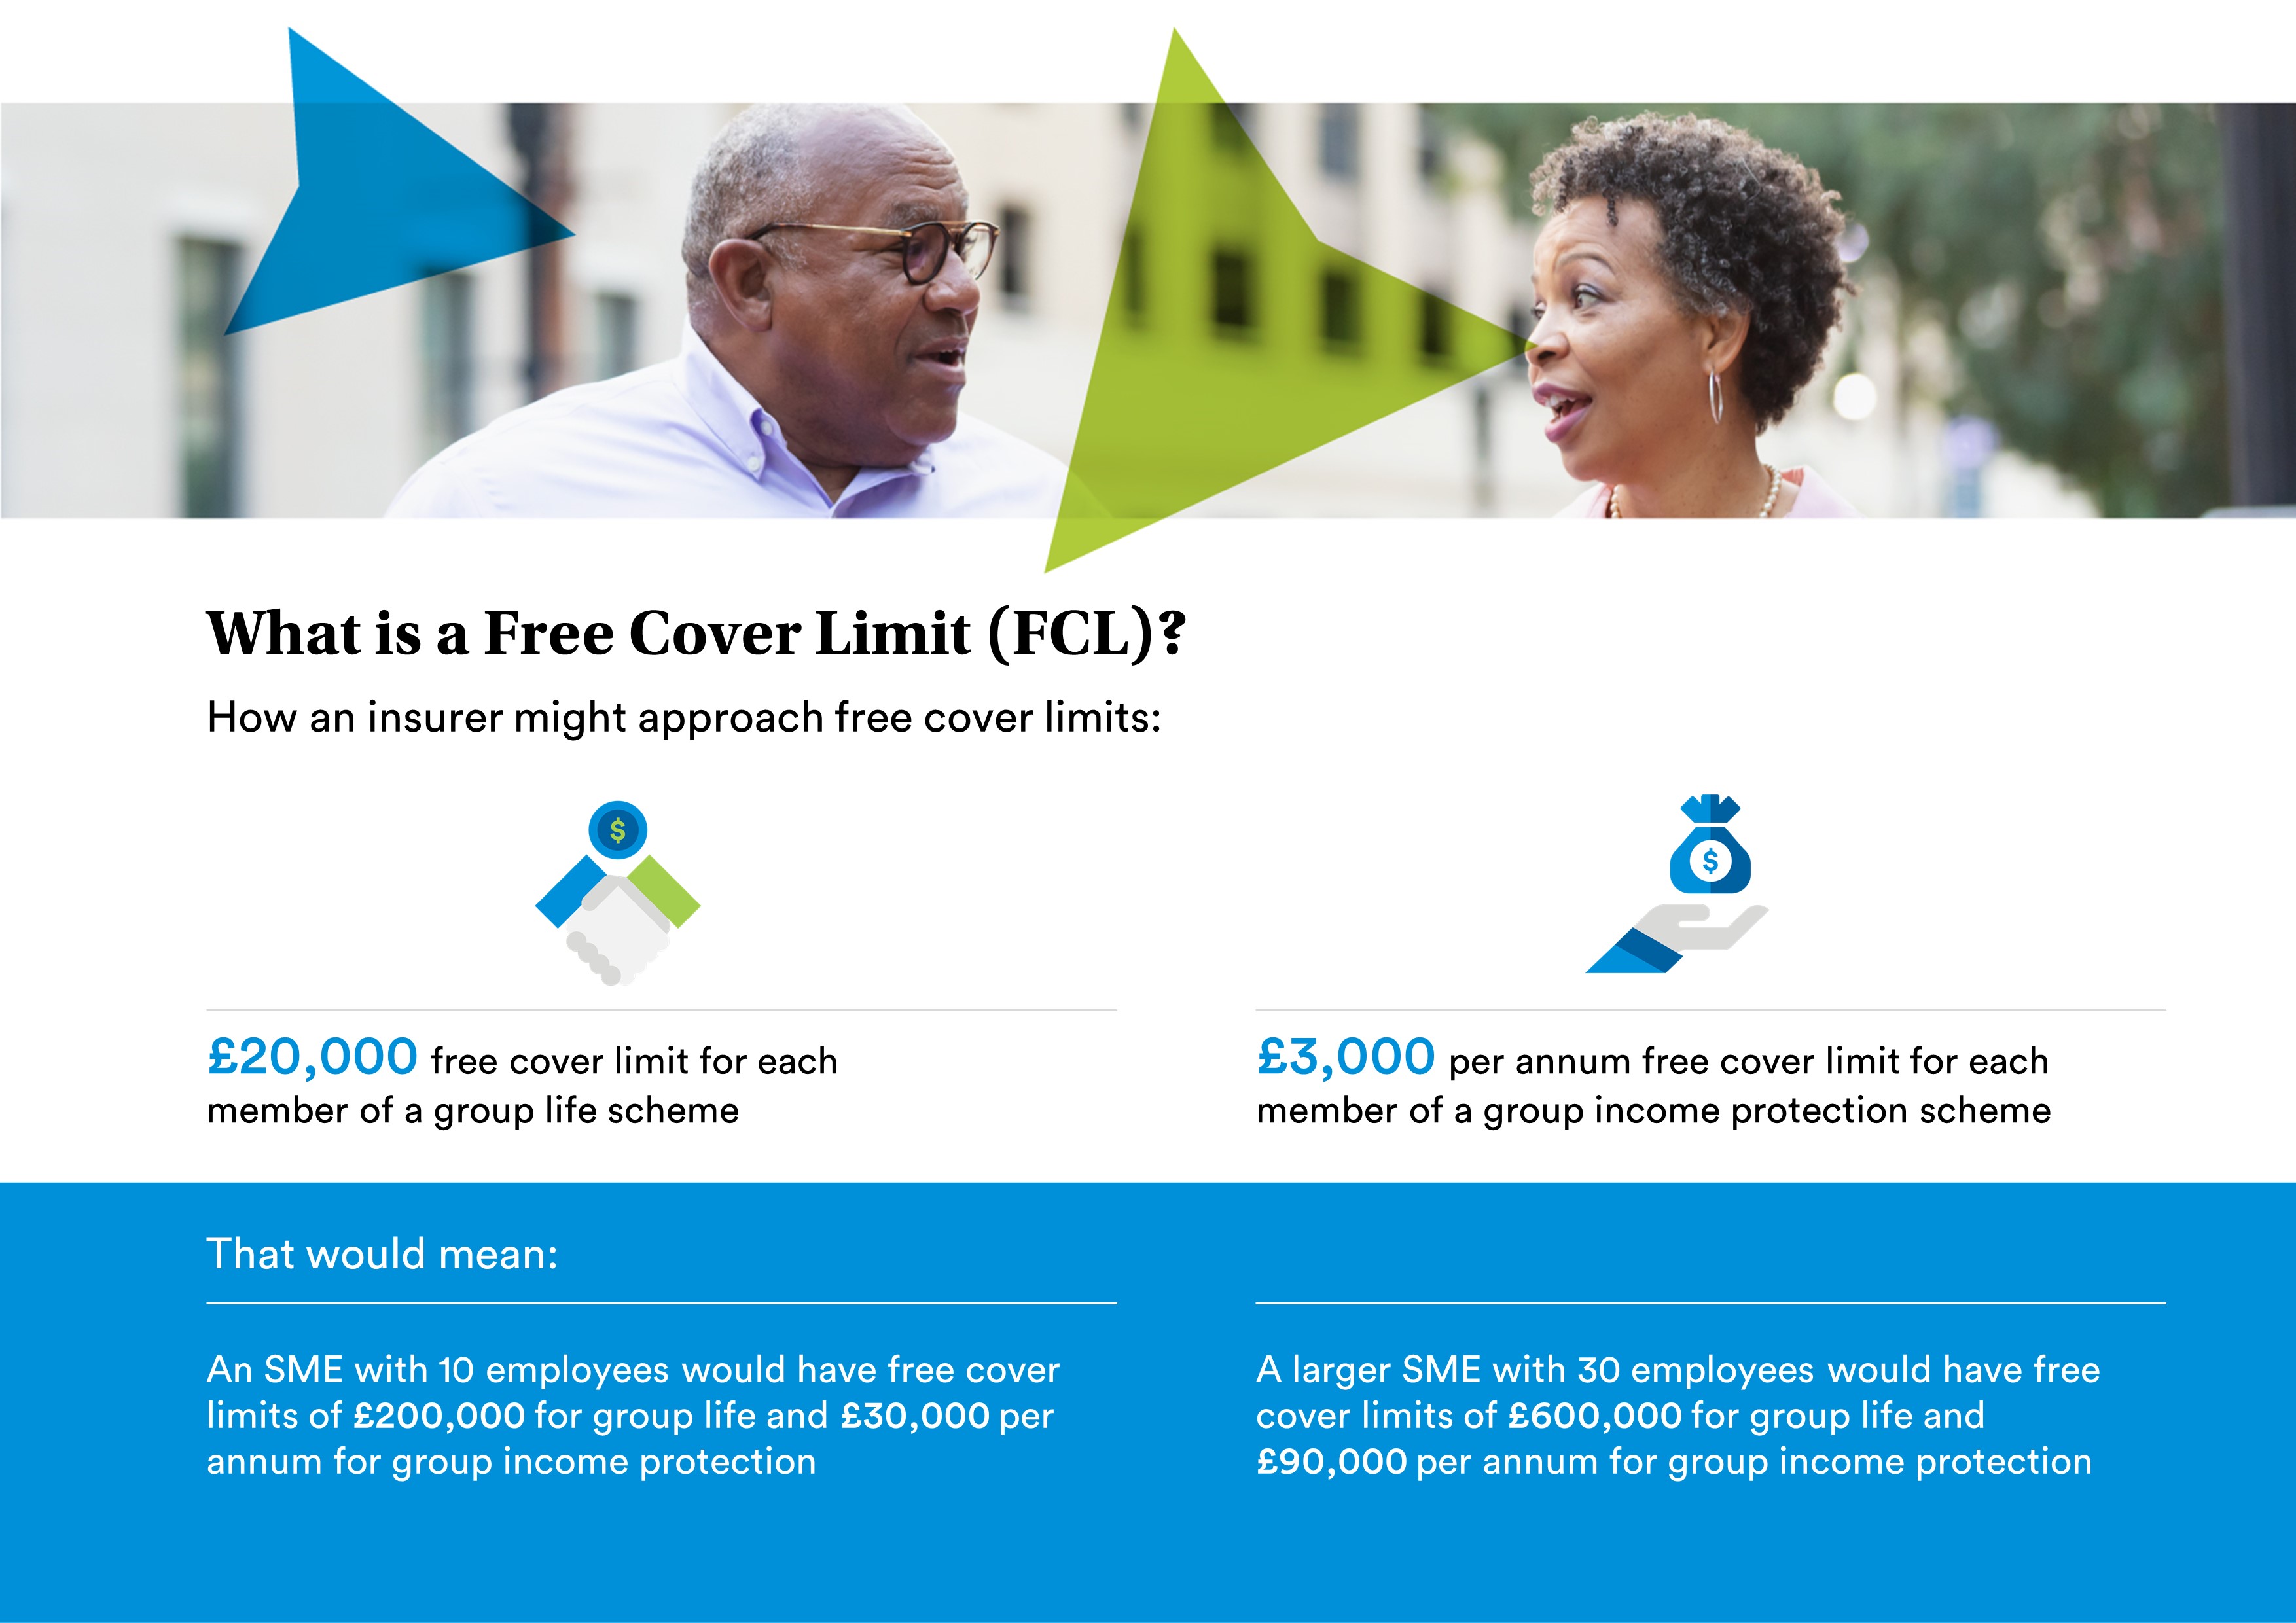 What is a free cover limit (FCL)? How an insurer might approach free cover limits: £20,000 free cover limit for each member of a group life scheme. £3,000 per annum free cover limit for each member of a group income protection scheme. That would mean: An SME with 10 employees would have free cover limits of £200,00 for group life and £30,000 per annum for group income protection. A larger SME with 30 employees would have free cover limits of £600,000 for group life and £90,000 per annum for group income protection.